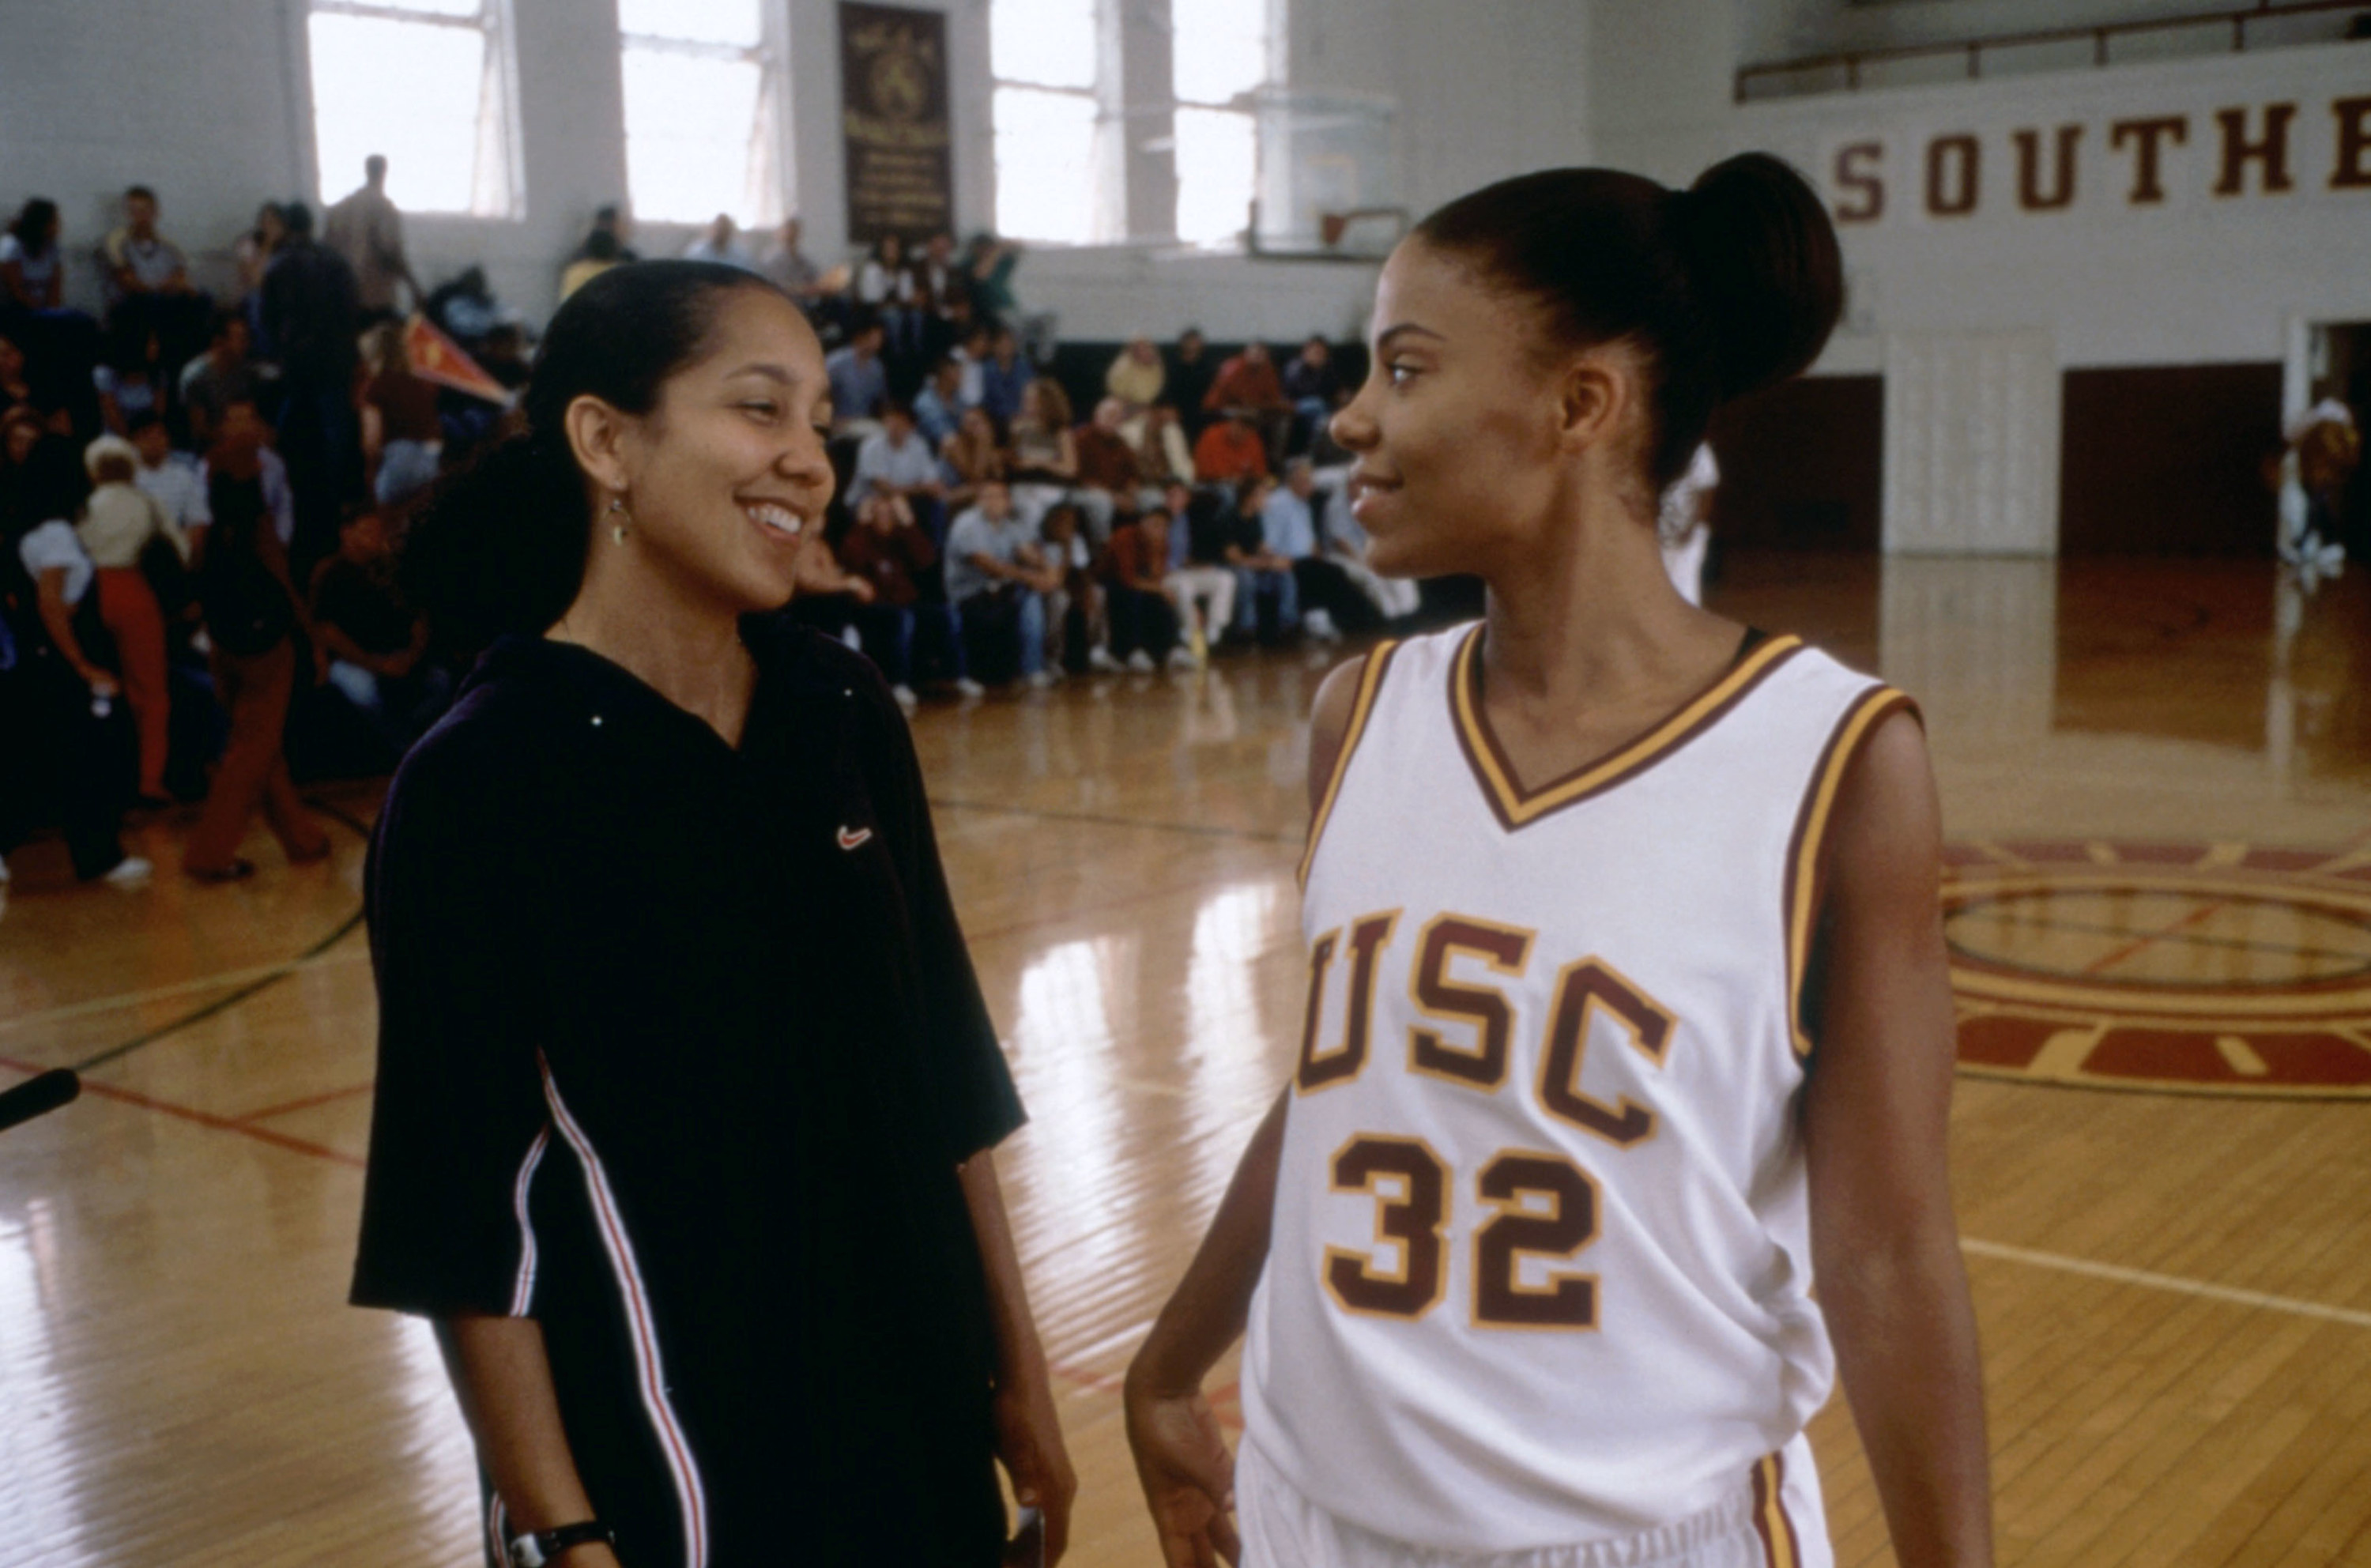 Sanaa with the director, Gina, on an indoor basketball court